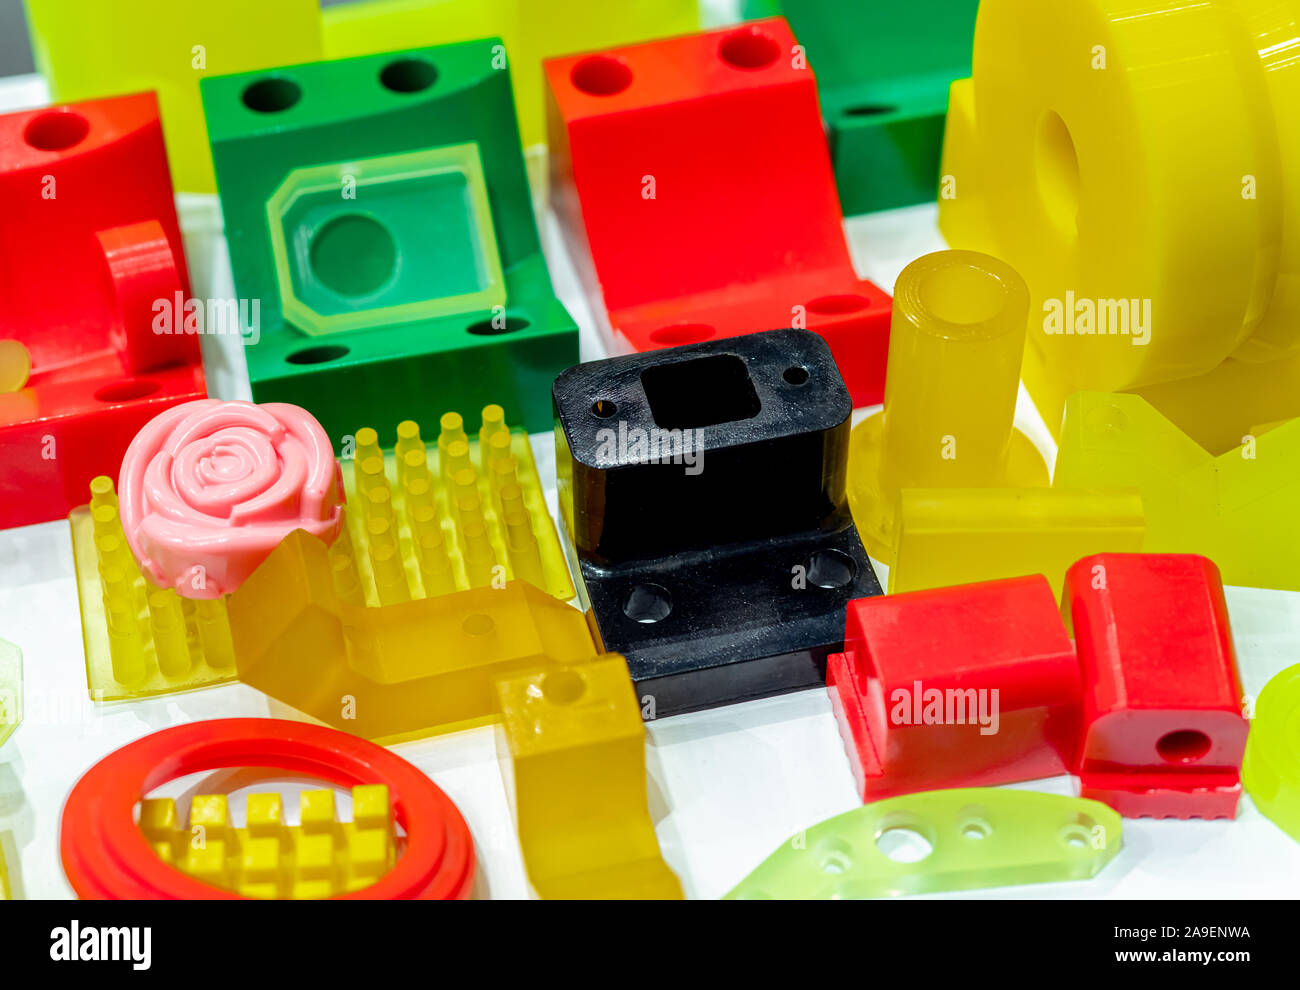 Engineering plastics. Plastic material used in manufacturing industry. Global engineering plastic market concept. Polyurethane and abs plastic parts Stock Photo